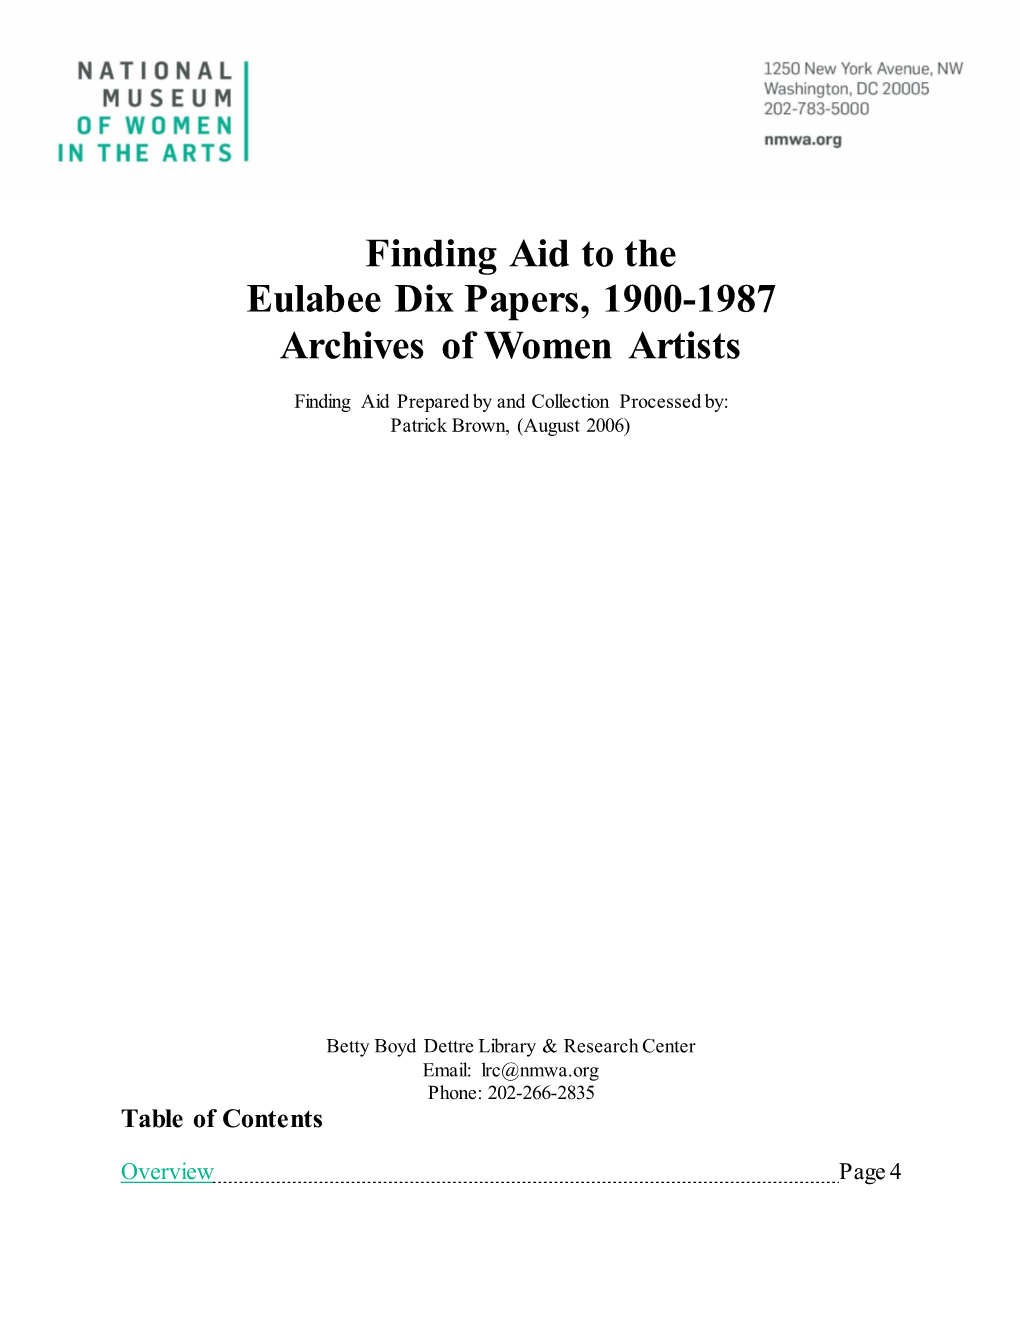 Finding Aid to the Eulabee Dix Papers, 1900-1987 Archives of Women Artists